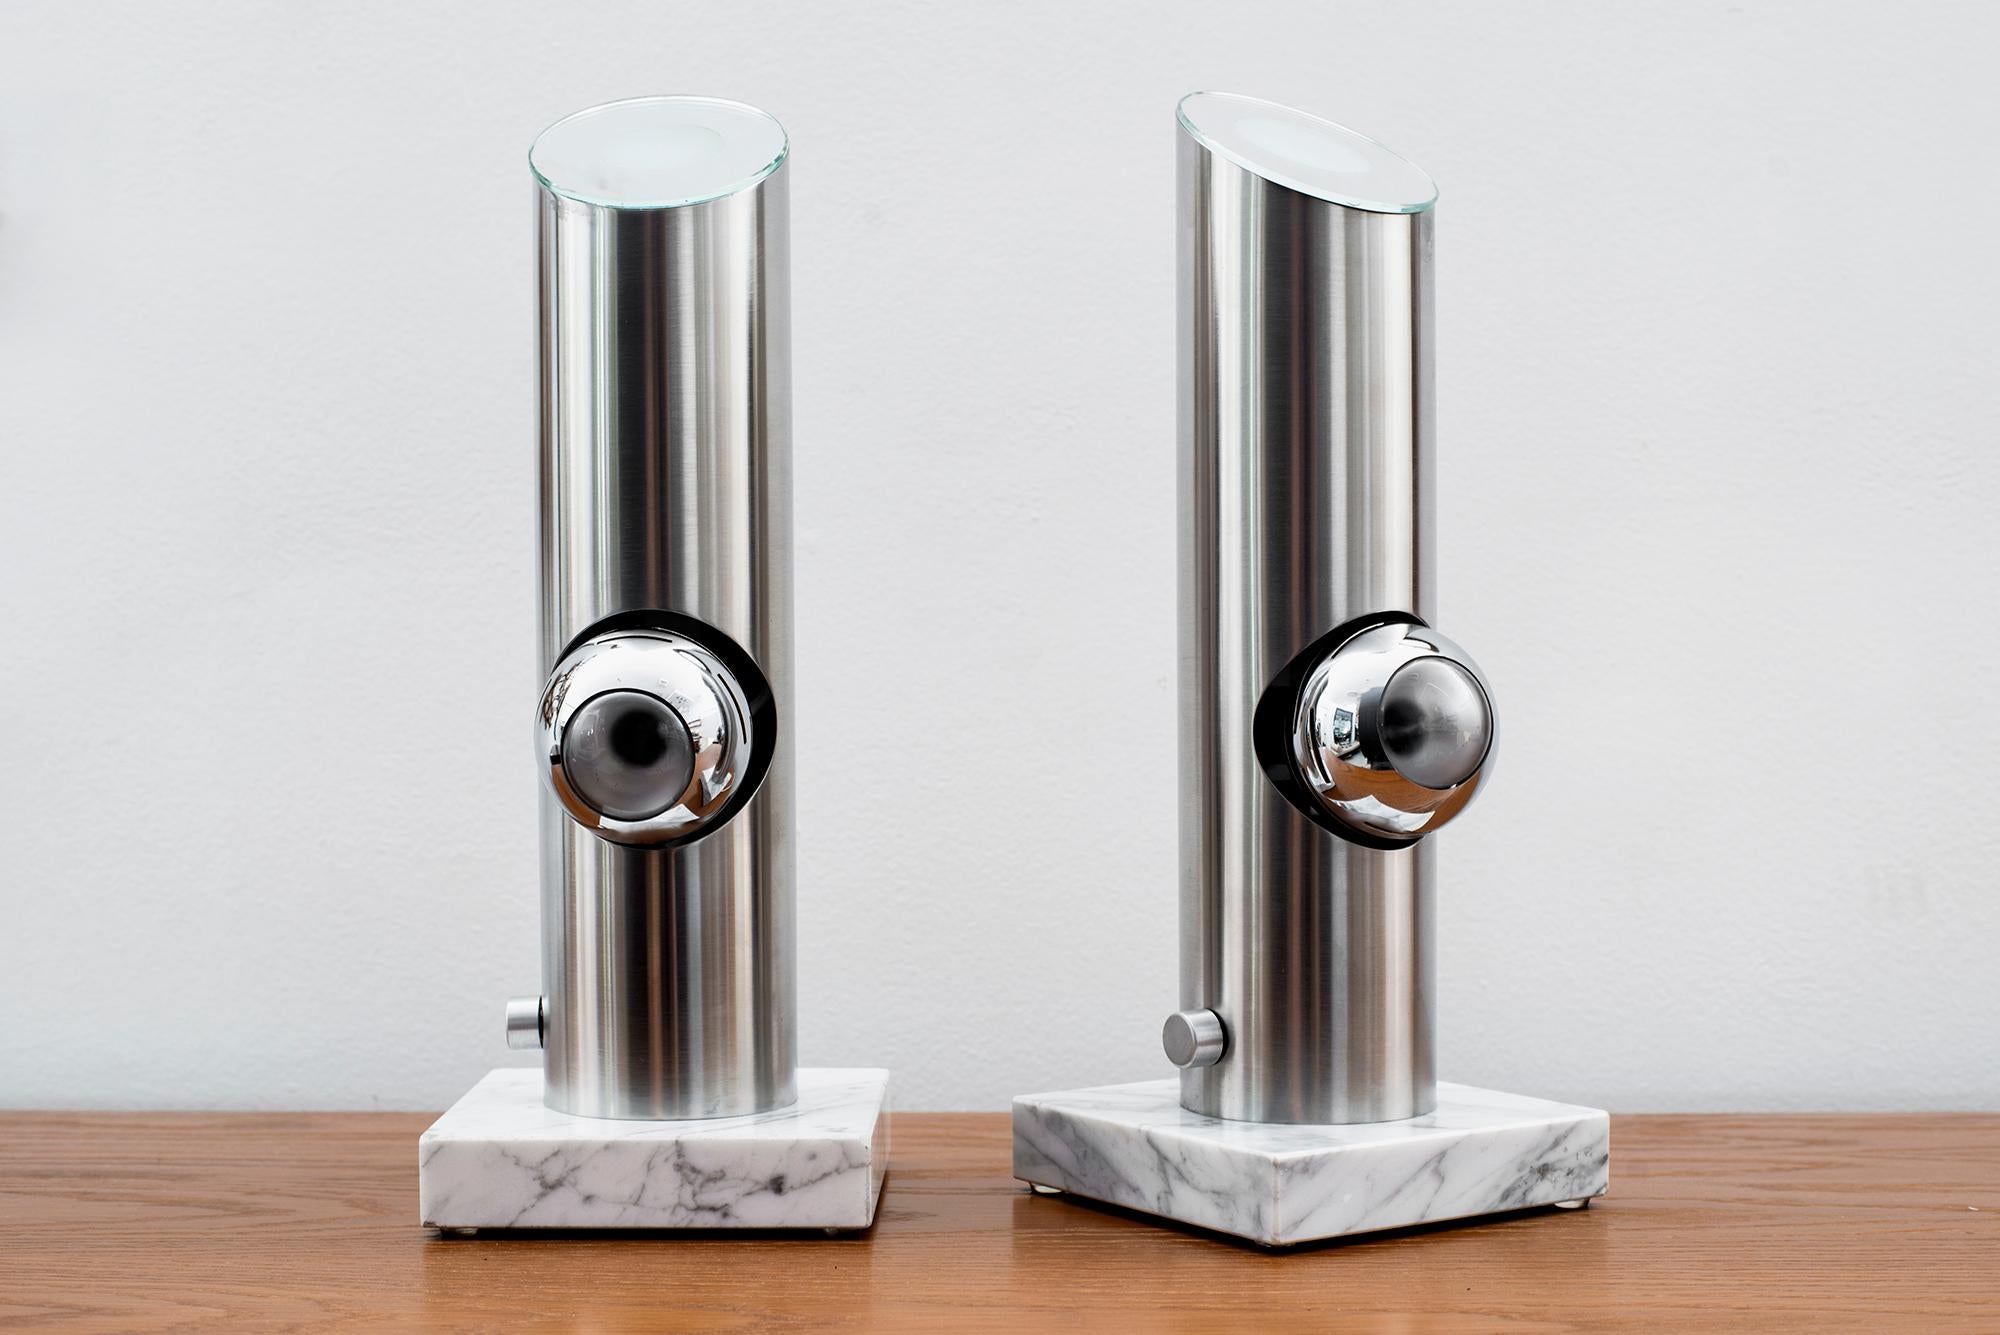 Two table lamps attributed to Angelo Lelii with marble base and brushed stainless steel structure, magnetized luminous globes in chromed steel and upper diffuser in mirrored glass.
Manufactured by Arredoluce, Italy, 1969
Newly restored and